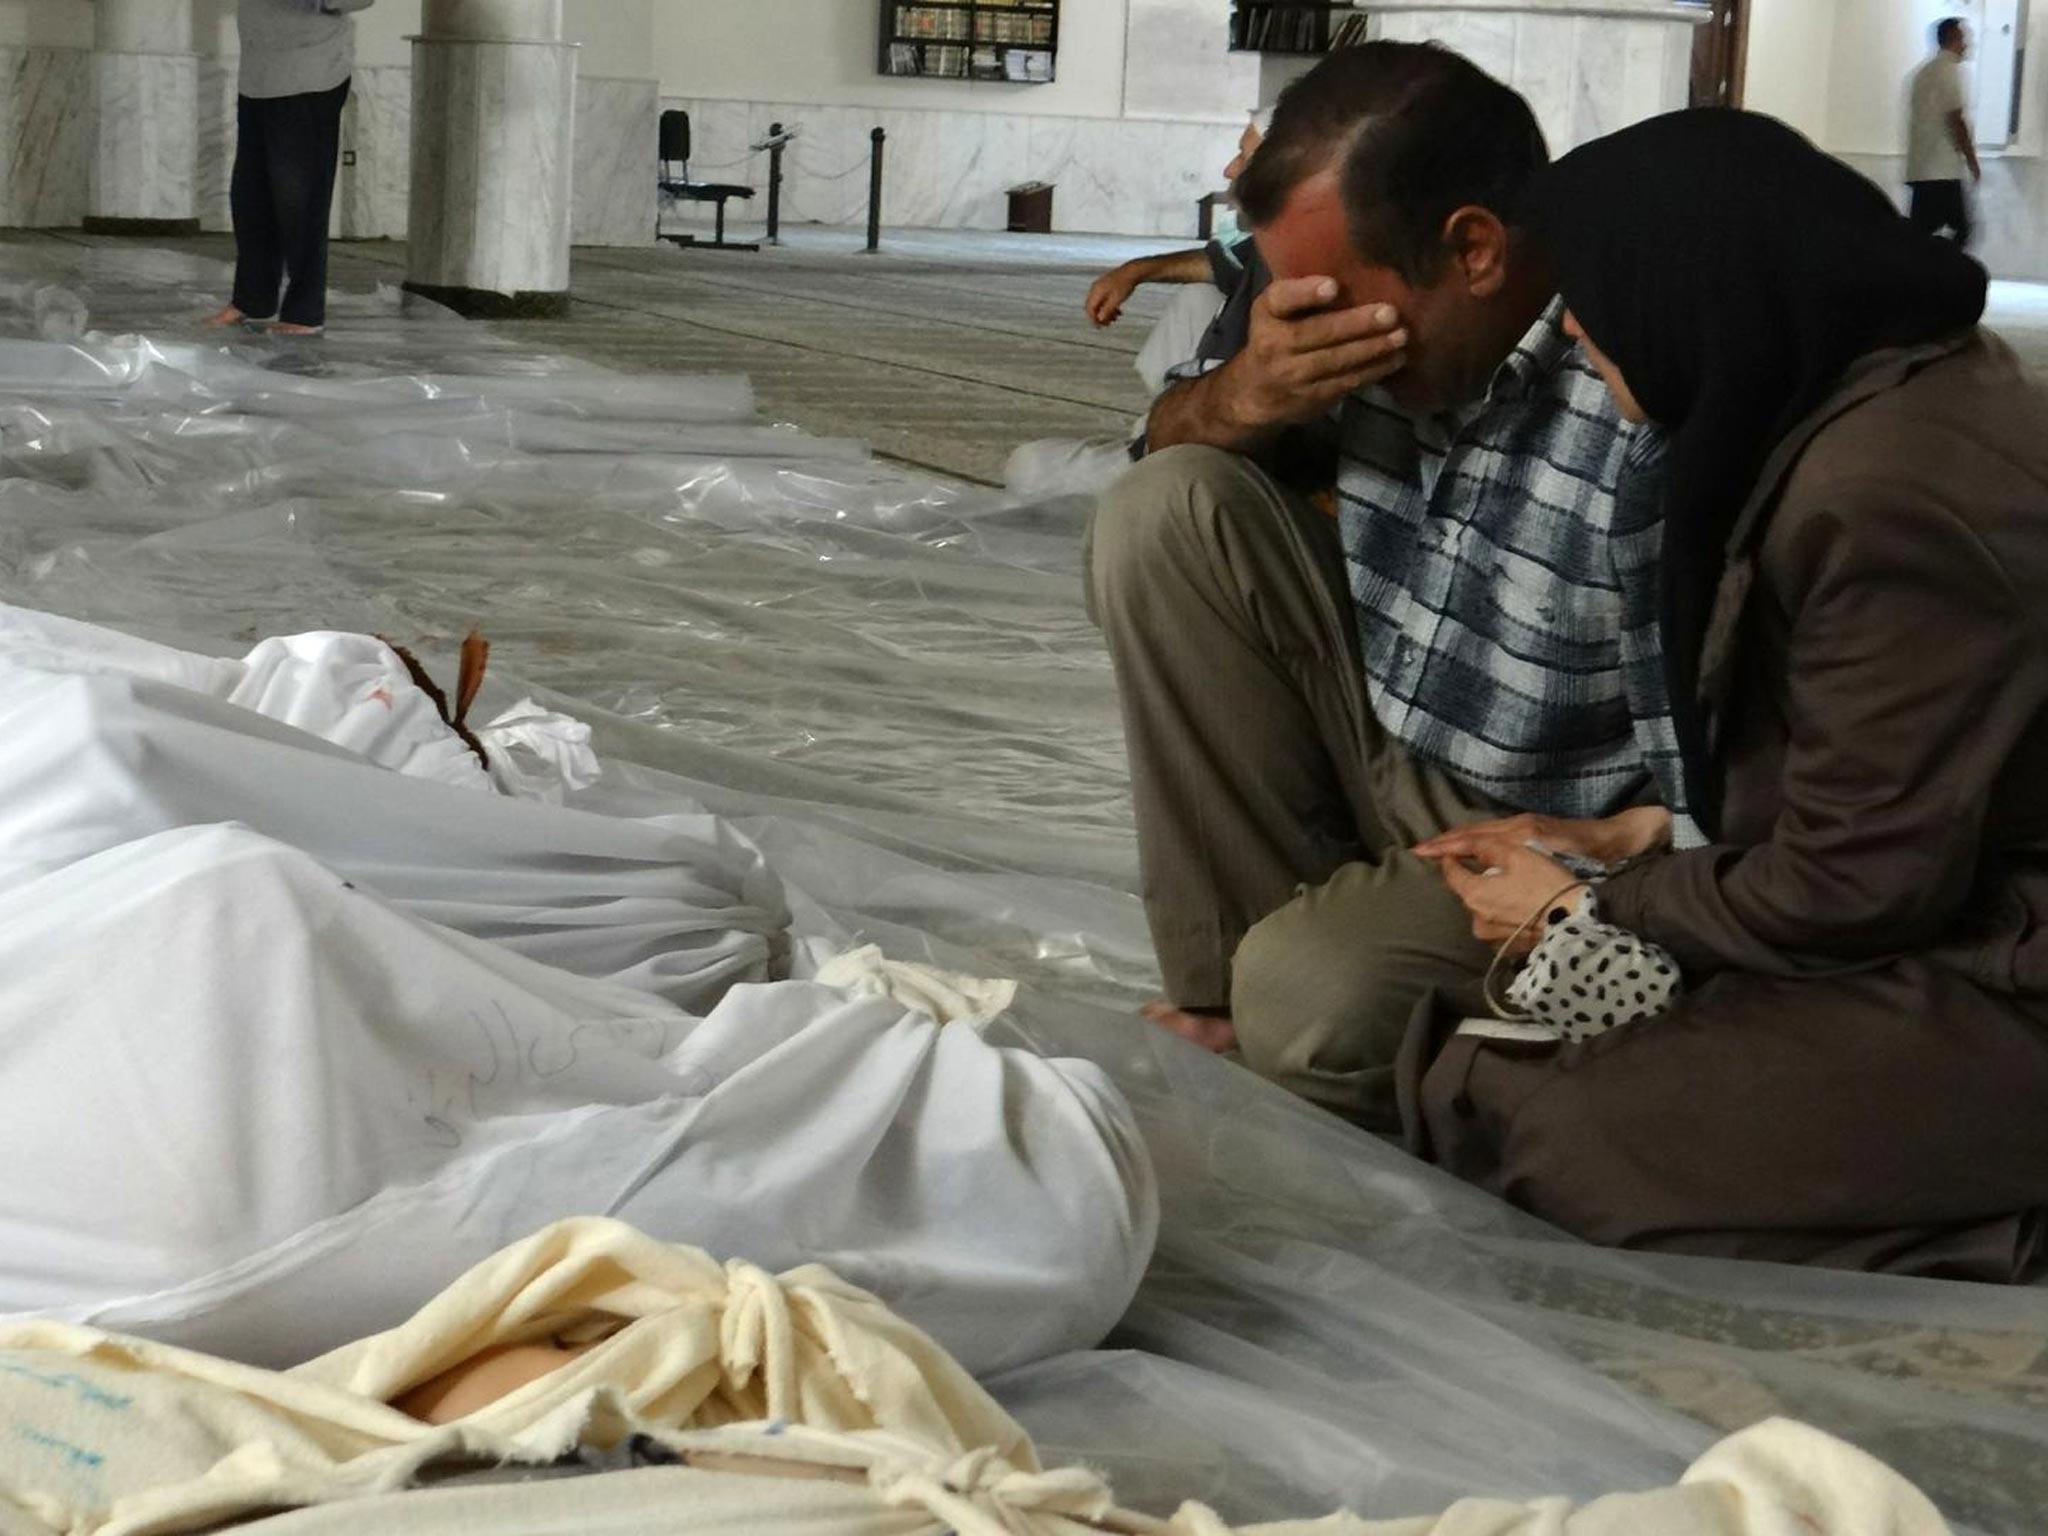 A Syrian couple mourning in front of bodies wrapped in shrouds ahead of funerals following what Syrian rebels claim to be a toxic gas attack by pro-government forces in eastern Ghouta, on the outskirts of Damascus